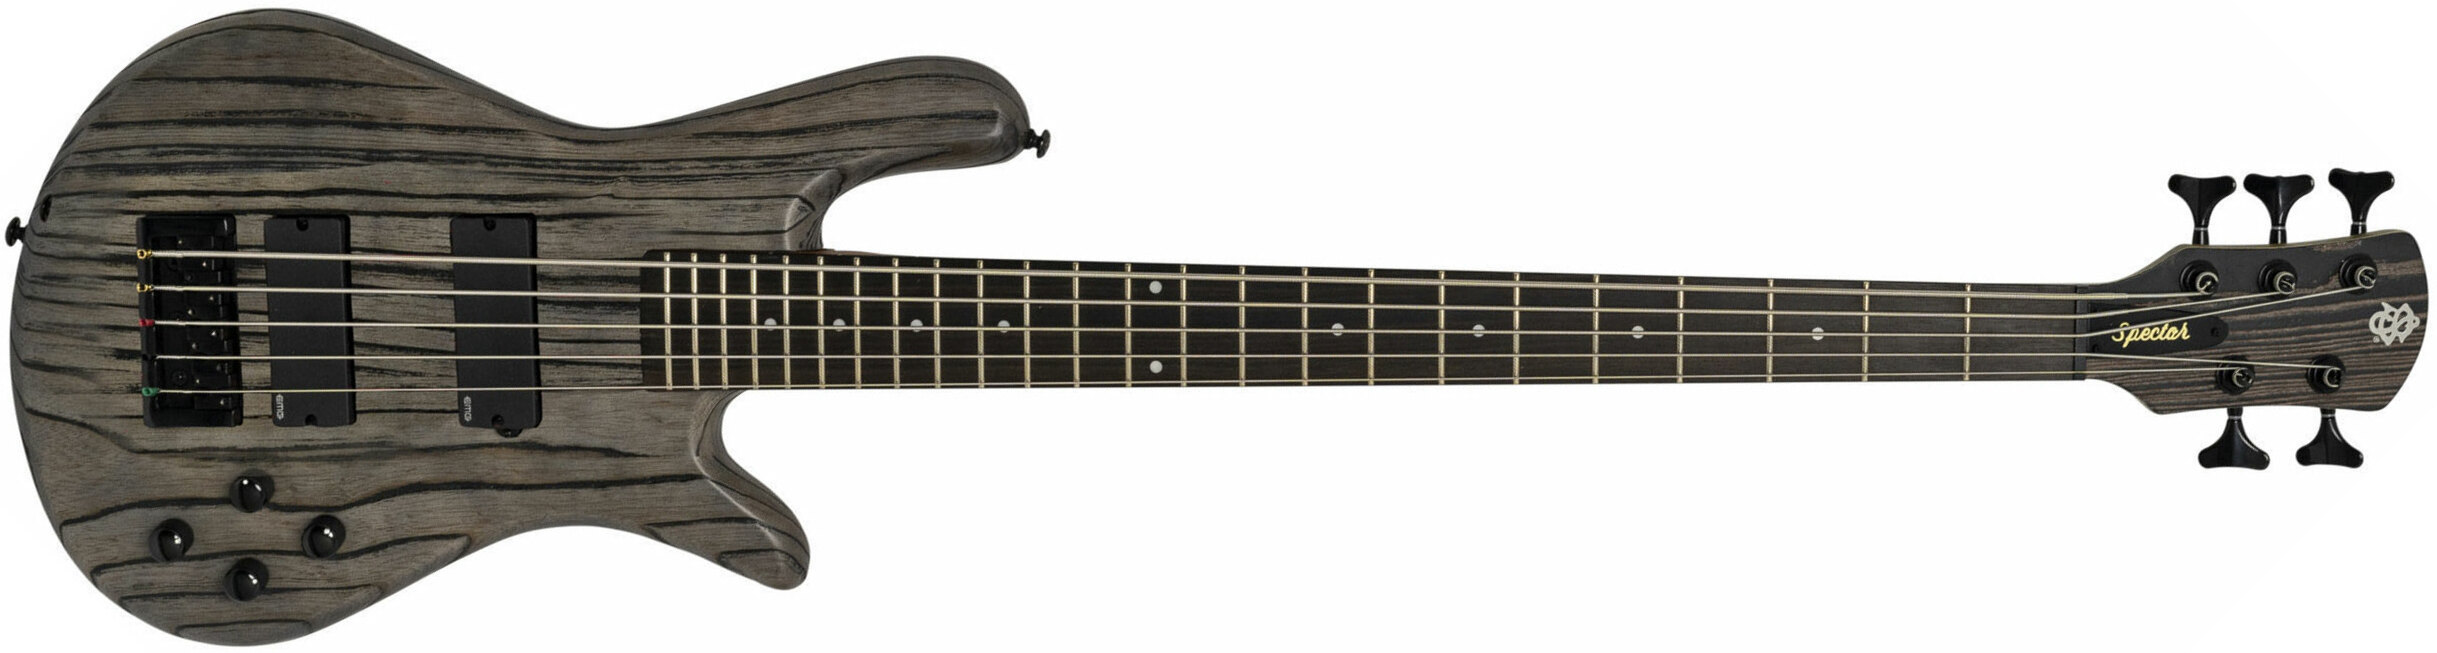 Spector Ns Pulse I 5c Active Emg Eb - Charcoal Grey - Solid body electric bass - Main picture